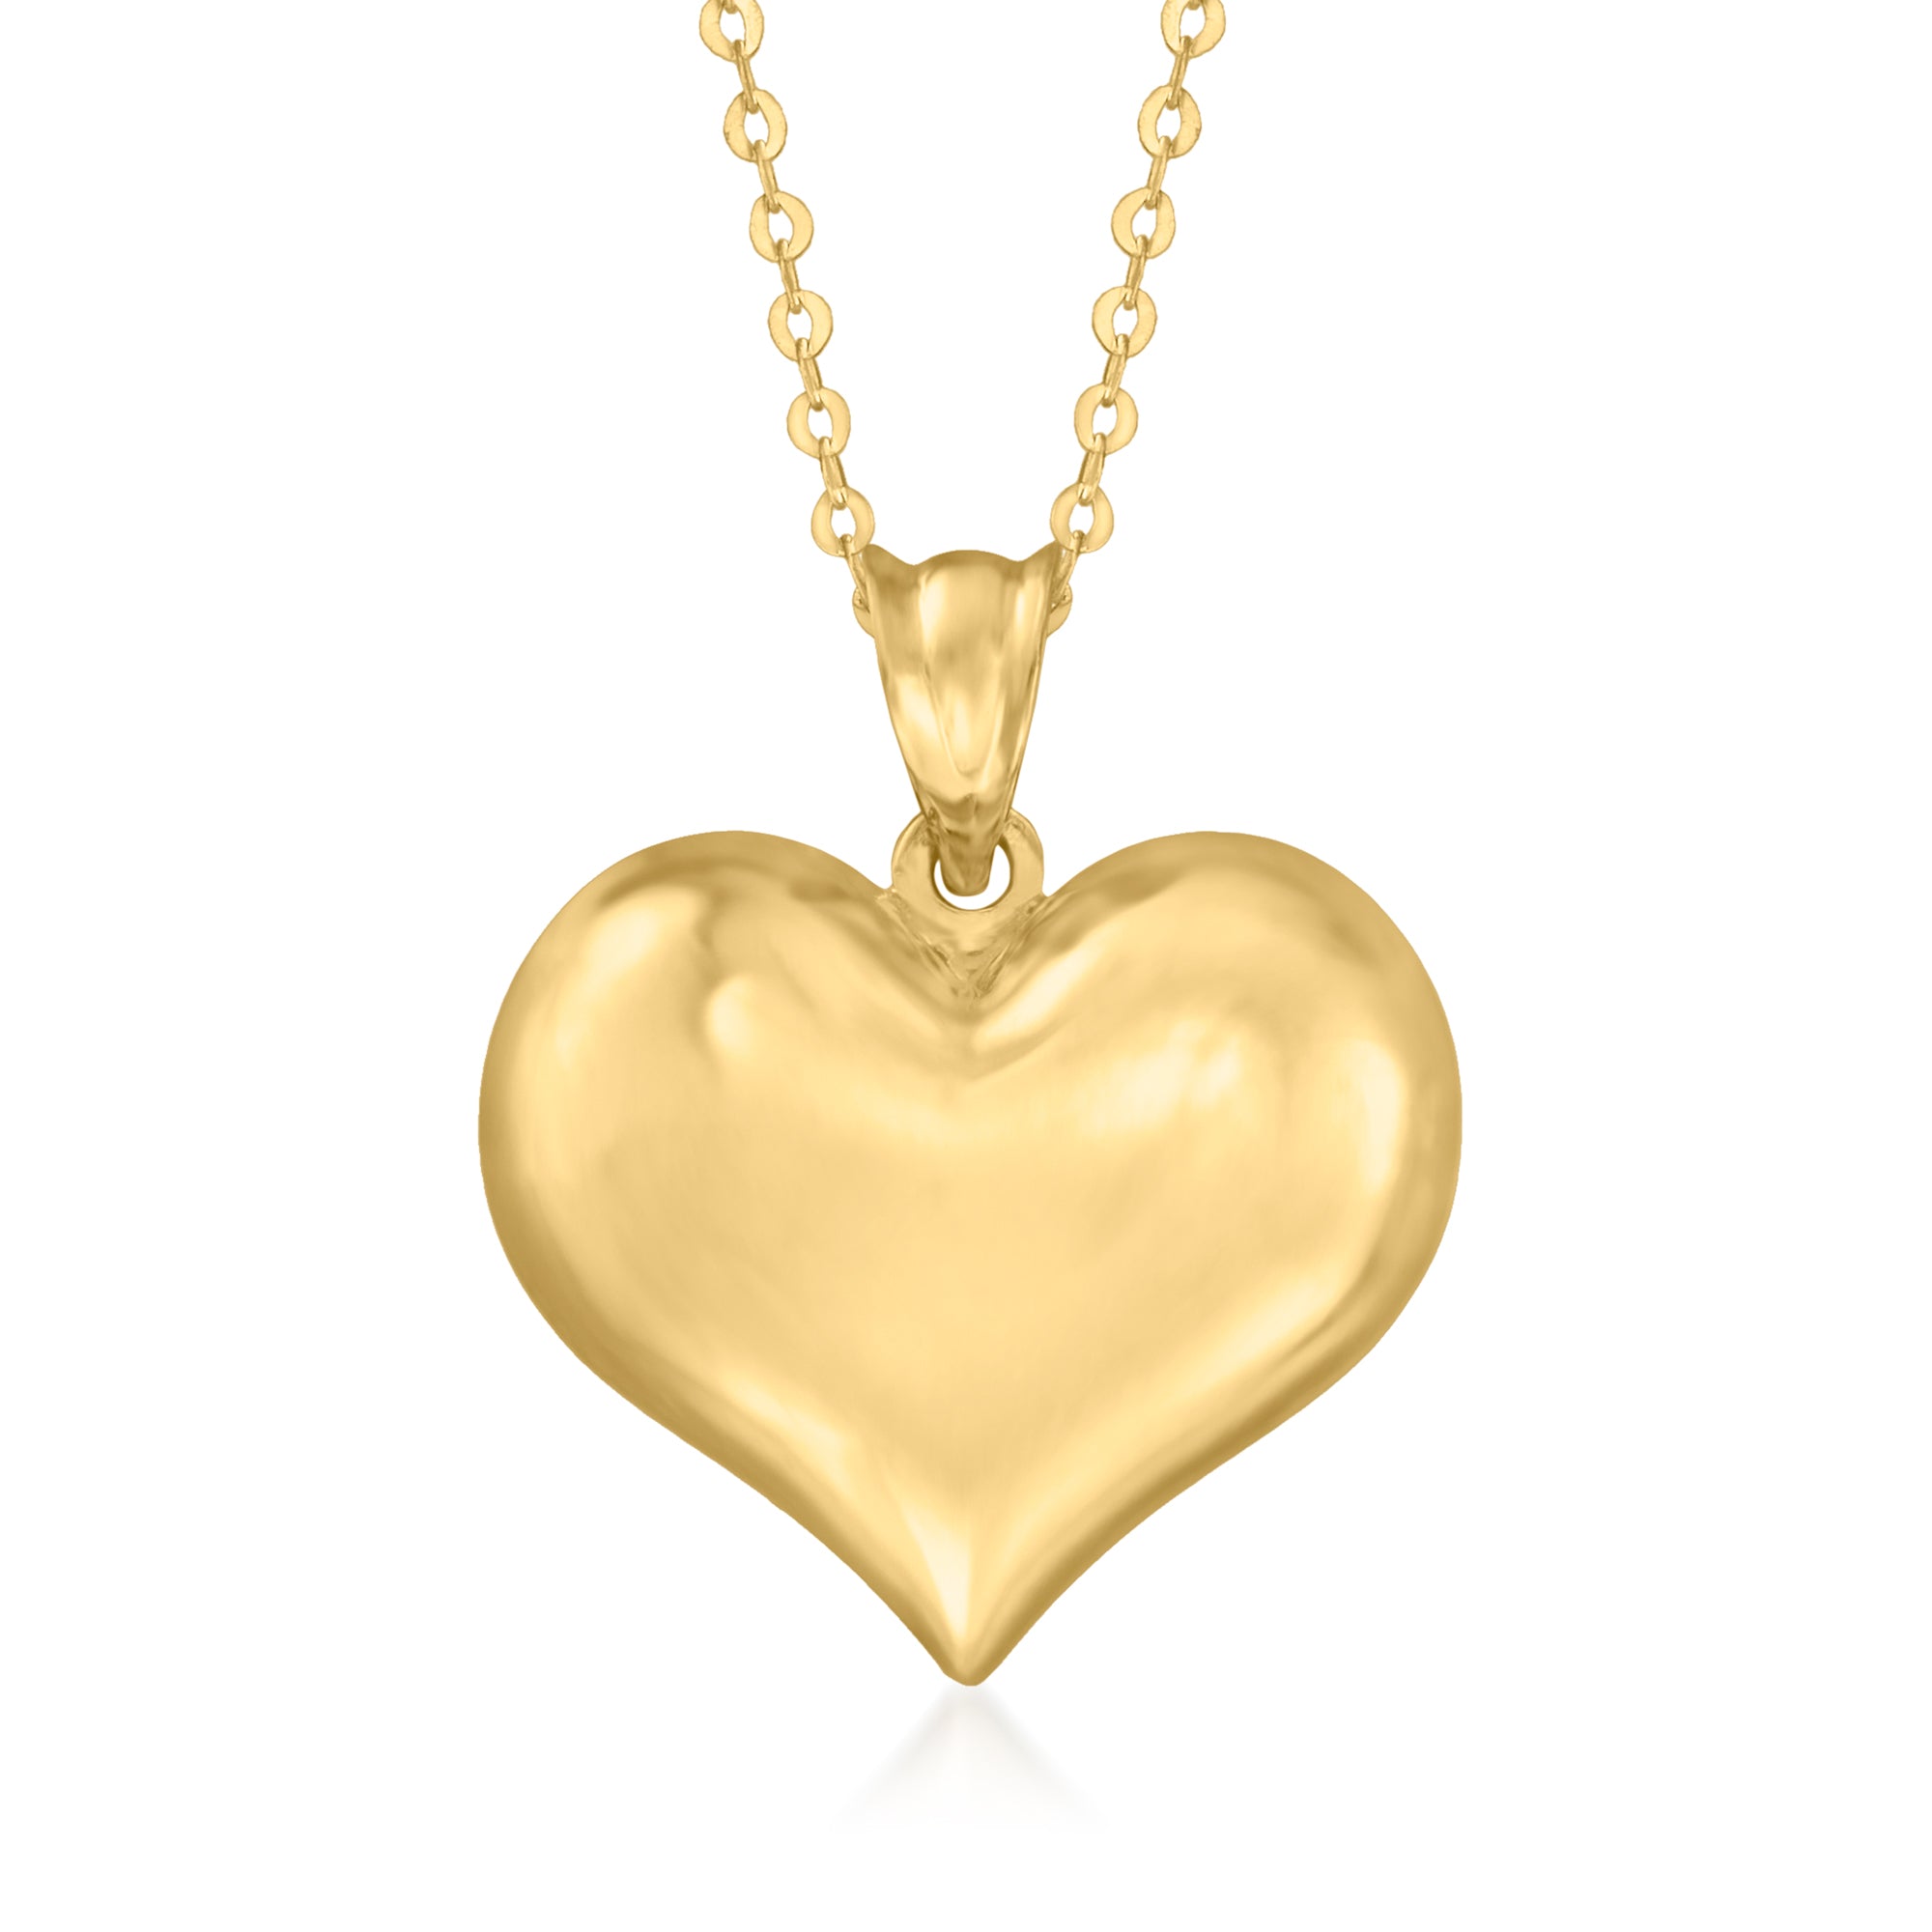 Shop Canaria Fine Jewelry Canaria 10kt Yellow Gold Puffed Heart Pendant Necklace